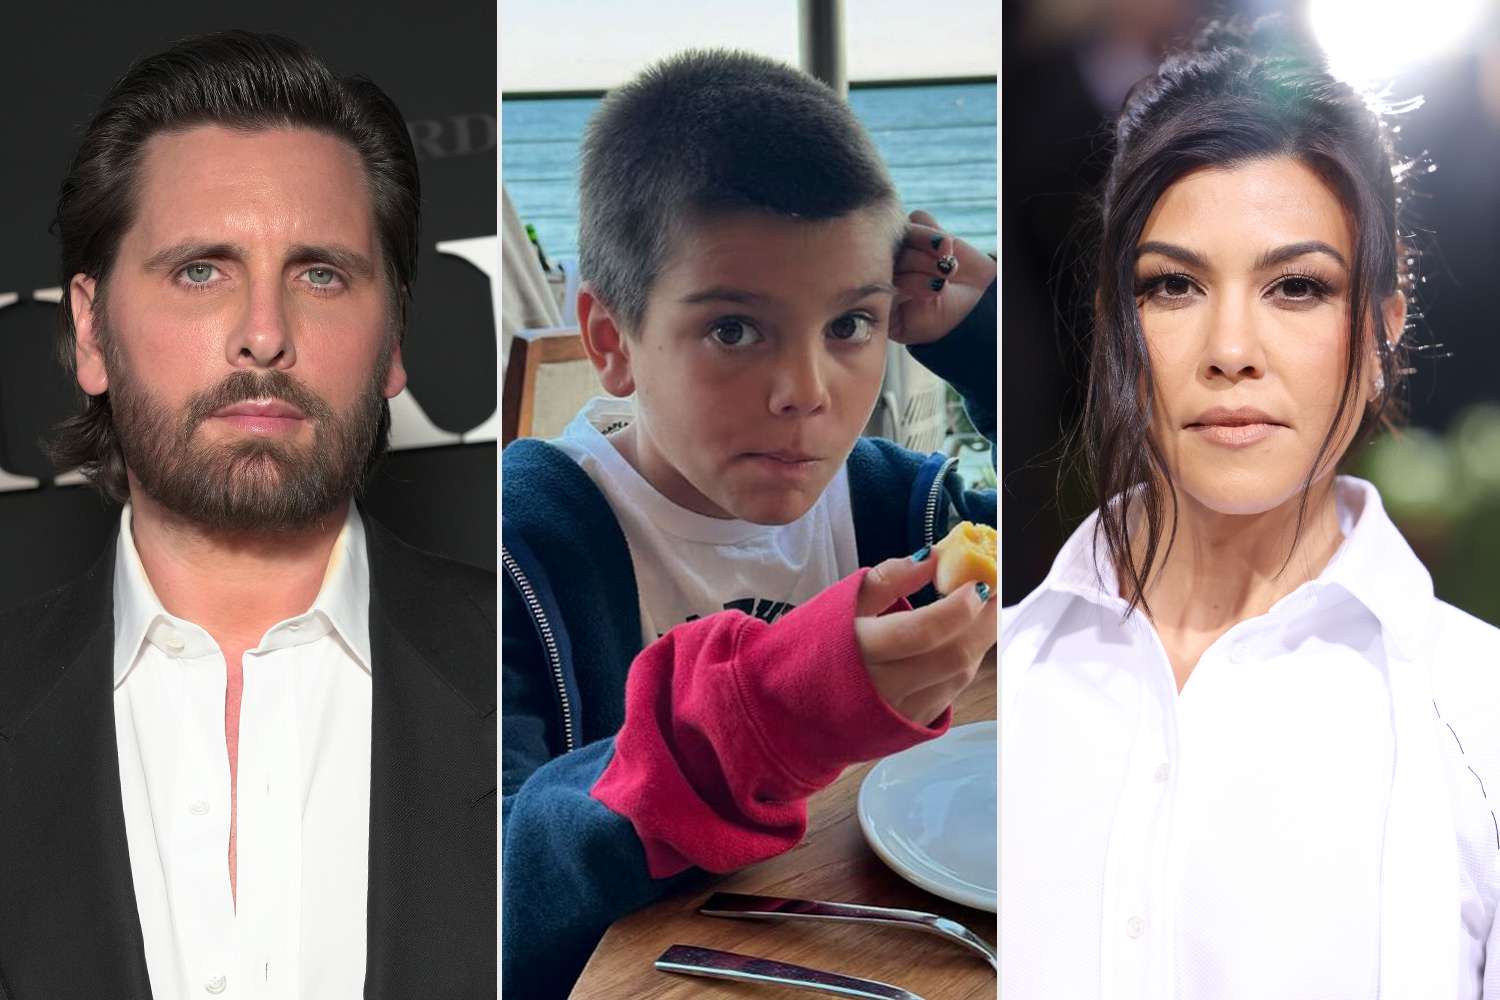 Kourtney Kardashian Says Reign’s Silly Sense of Humor Is ‘Like His Dad’ Scott Disick: ‘Just What We Need’